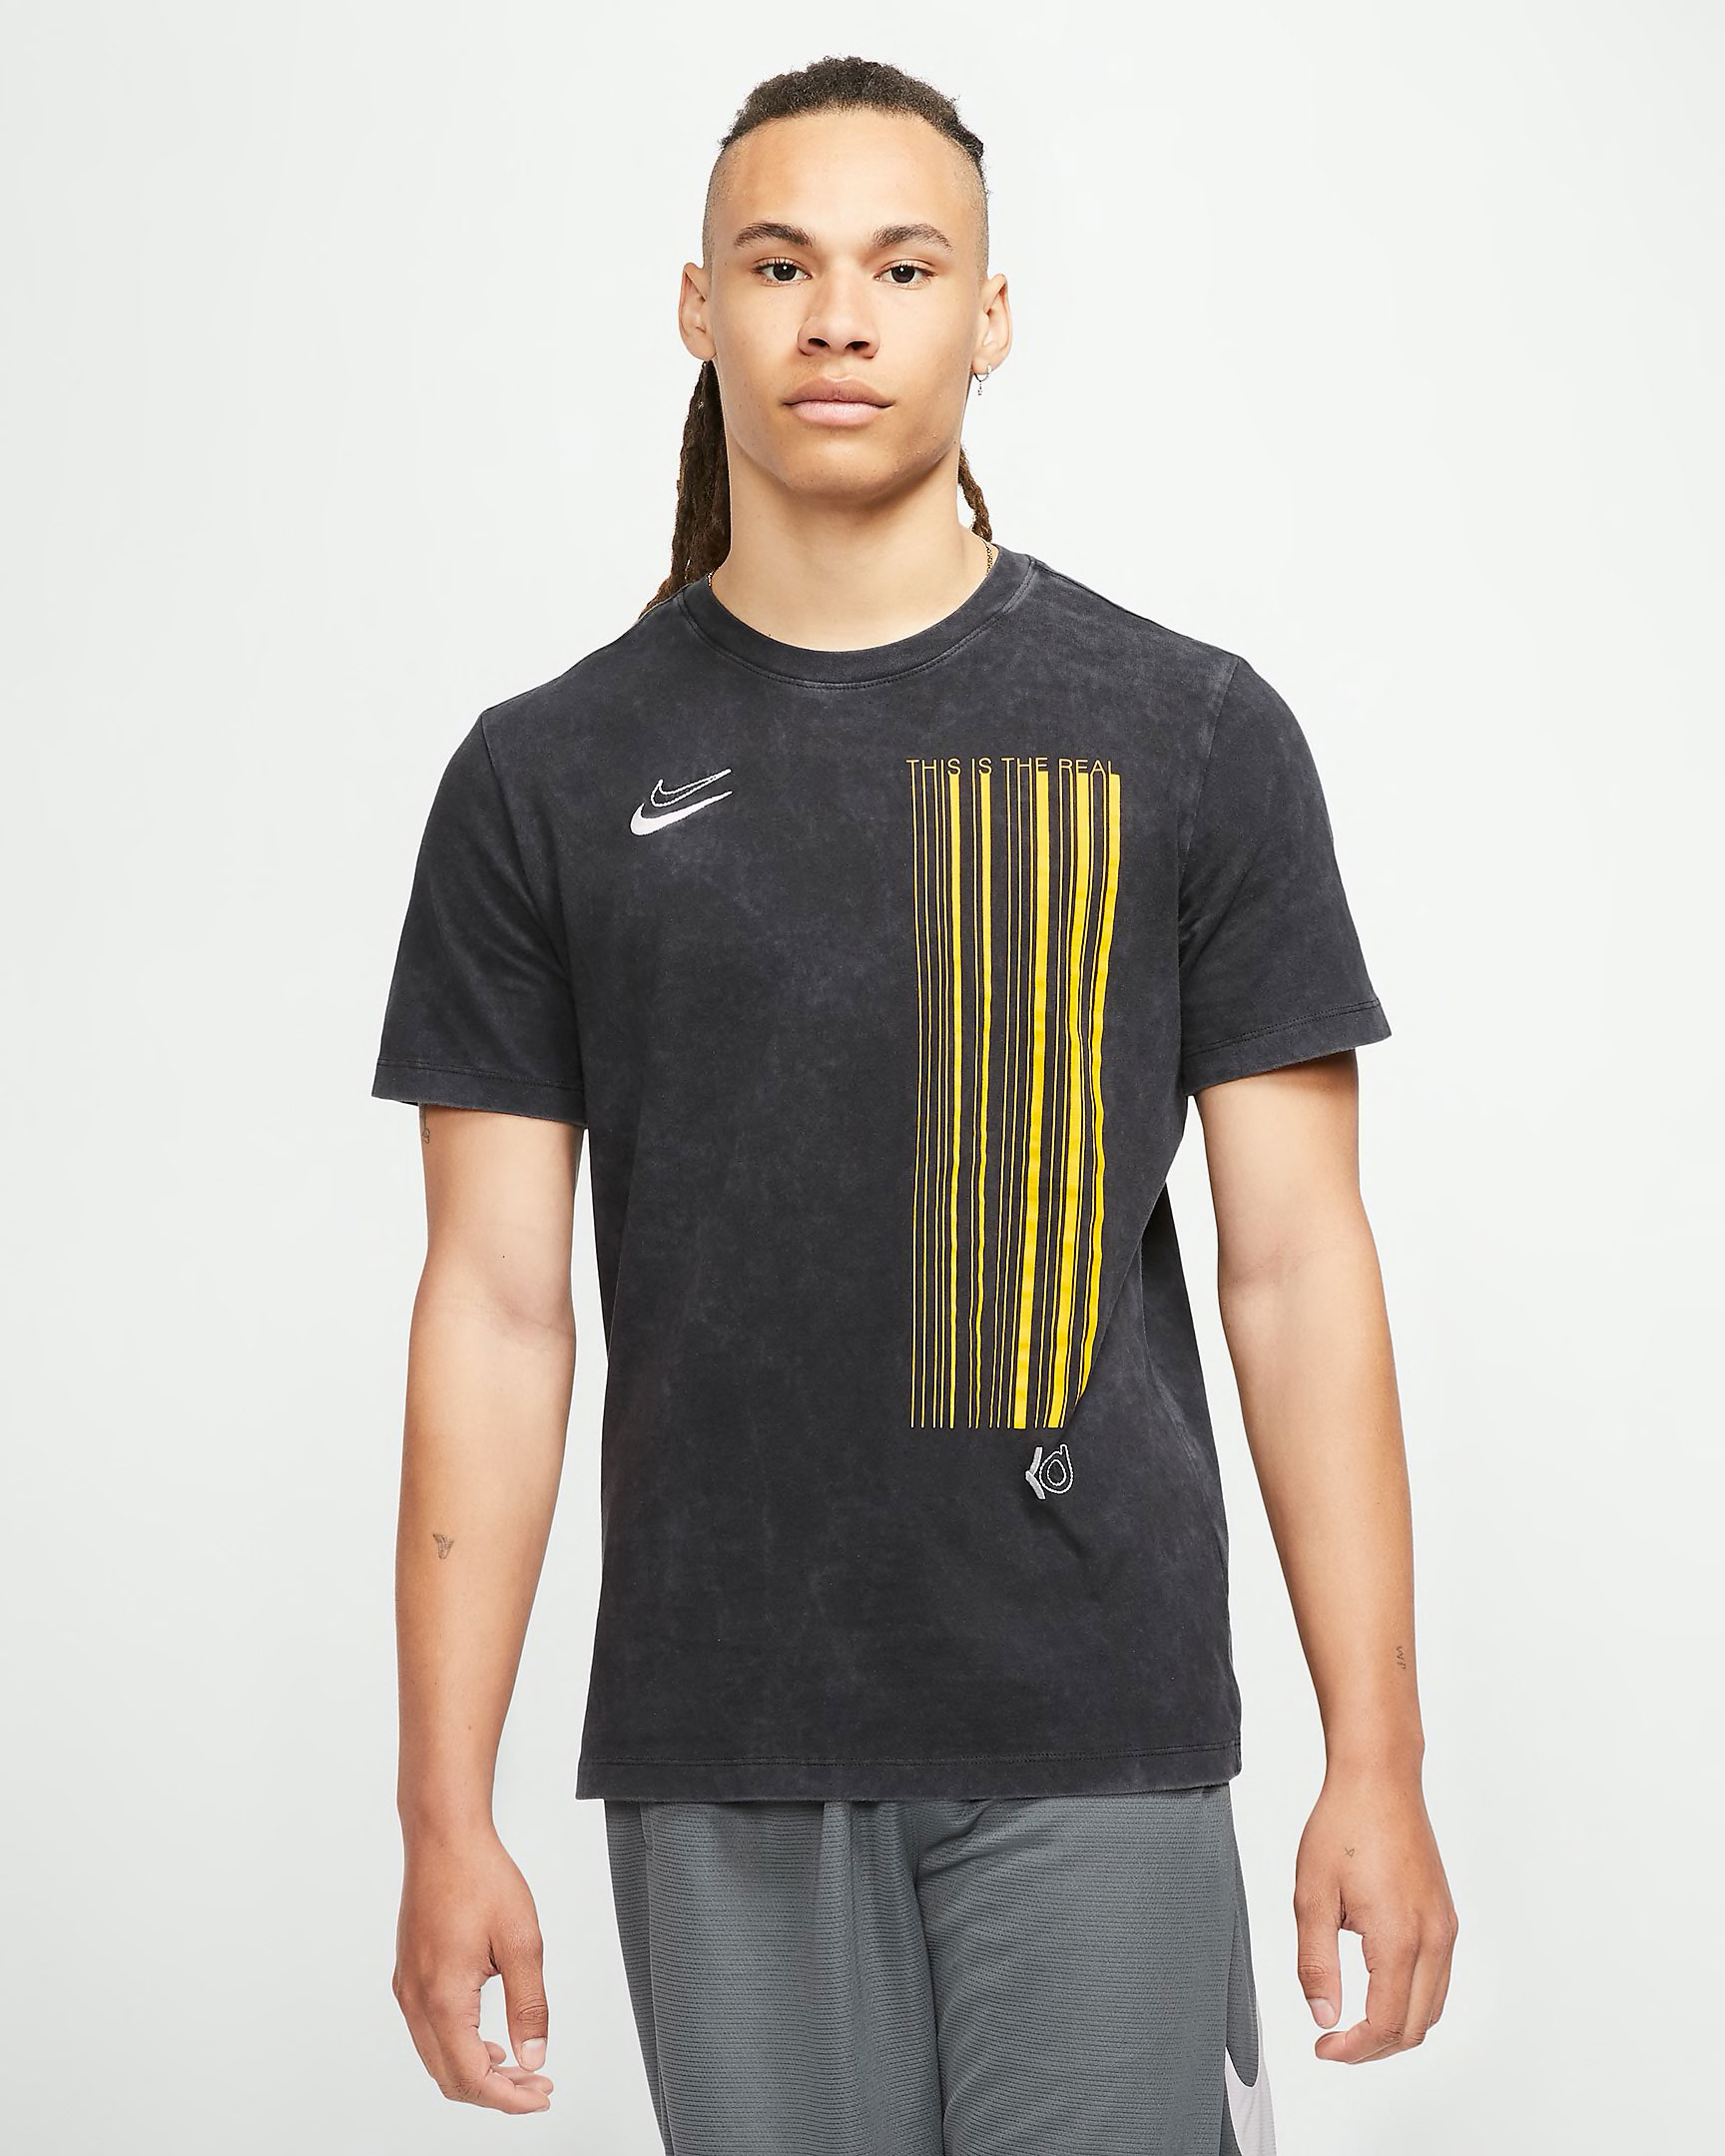 Nike KD 13 Hype Clothing Outfits | SneakerFits.com